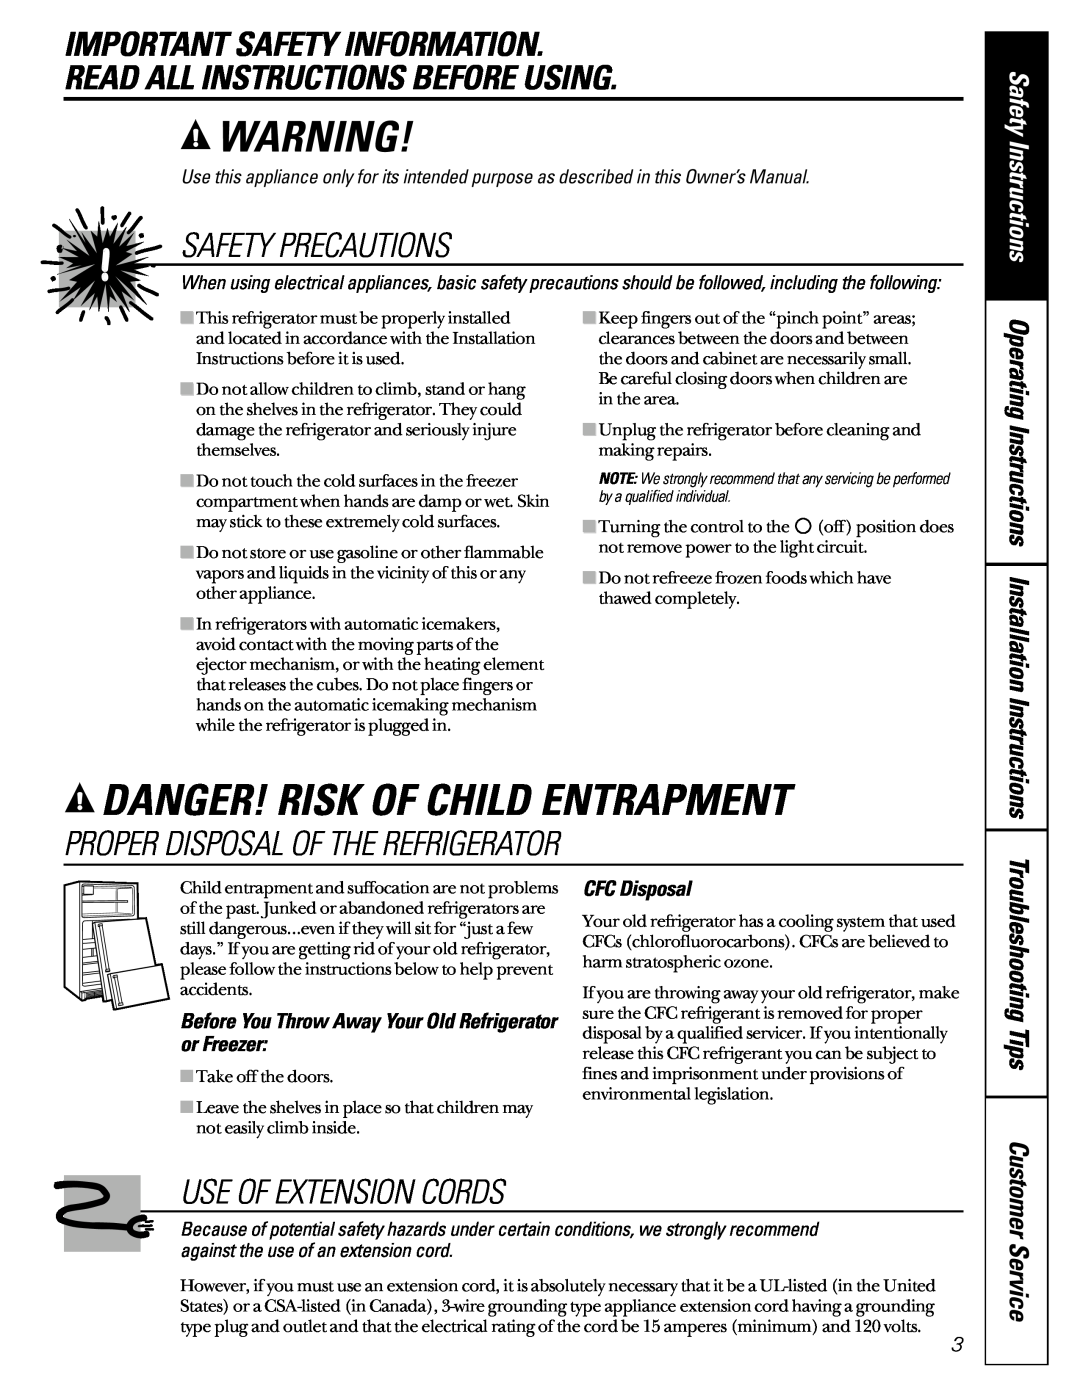 GE 162D7744P009 Danger! Risk Of Child Entrapment, Important Safety Information, Read All Instructions Before Using 